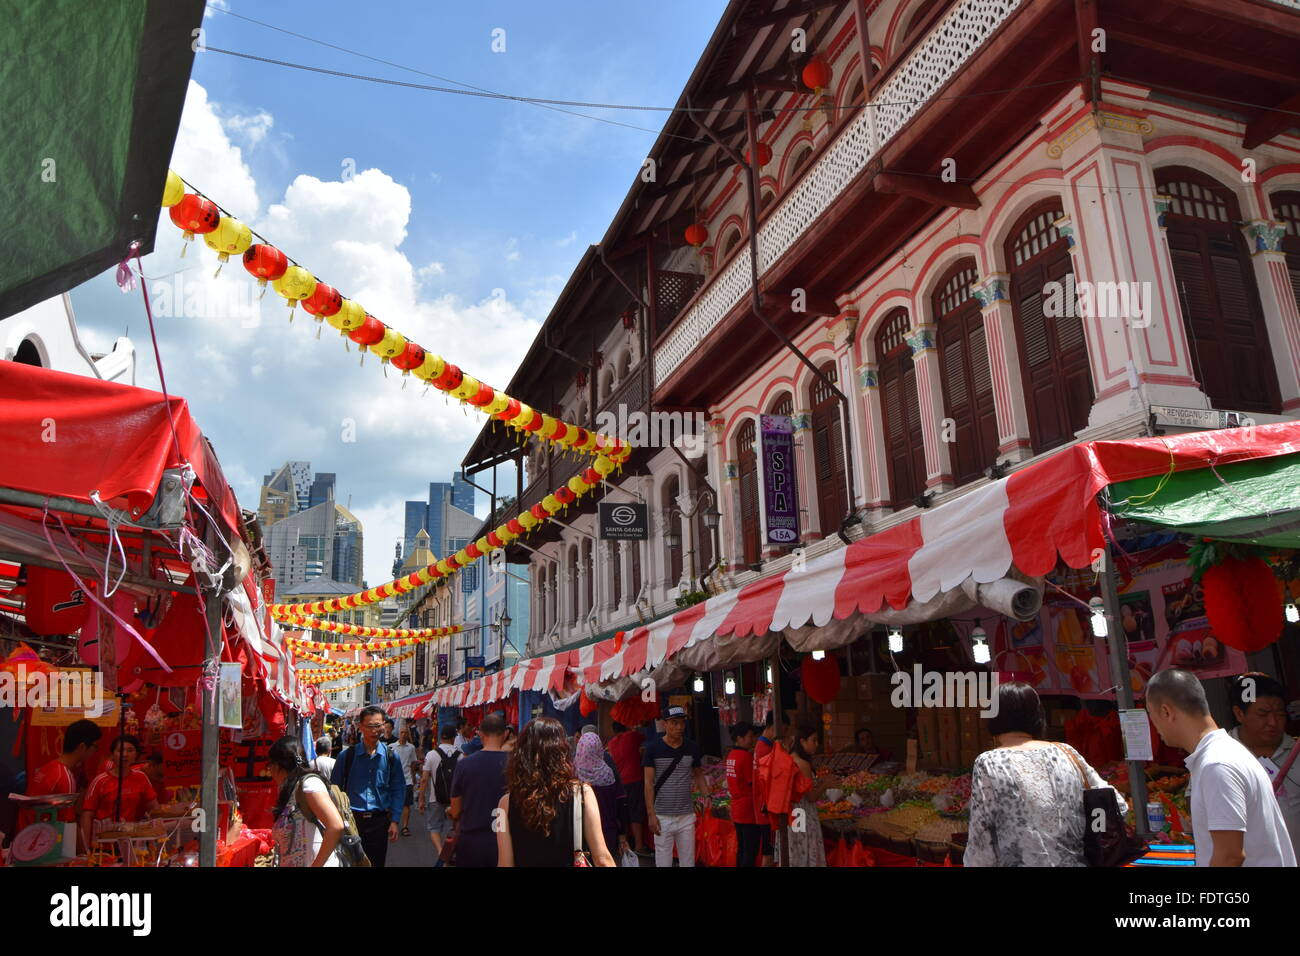 Colourful street scene in Chinatown Singapore during Chinese New Year Stock Photo